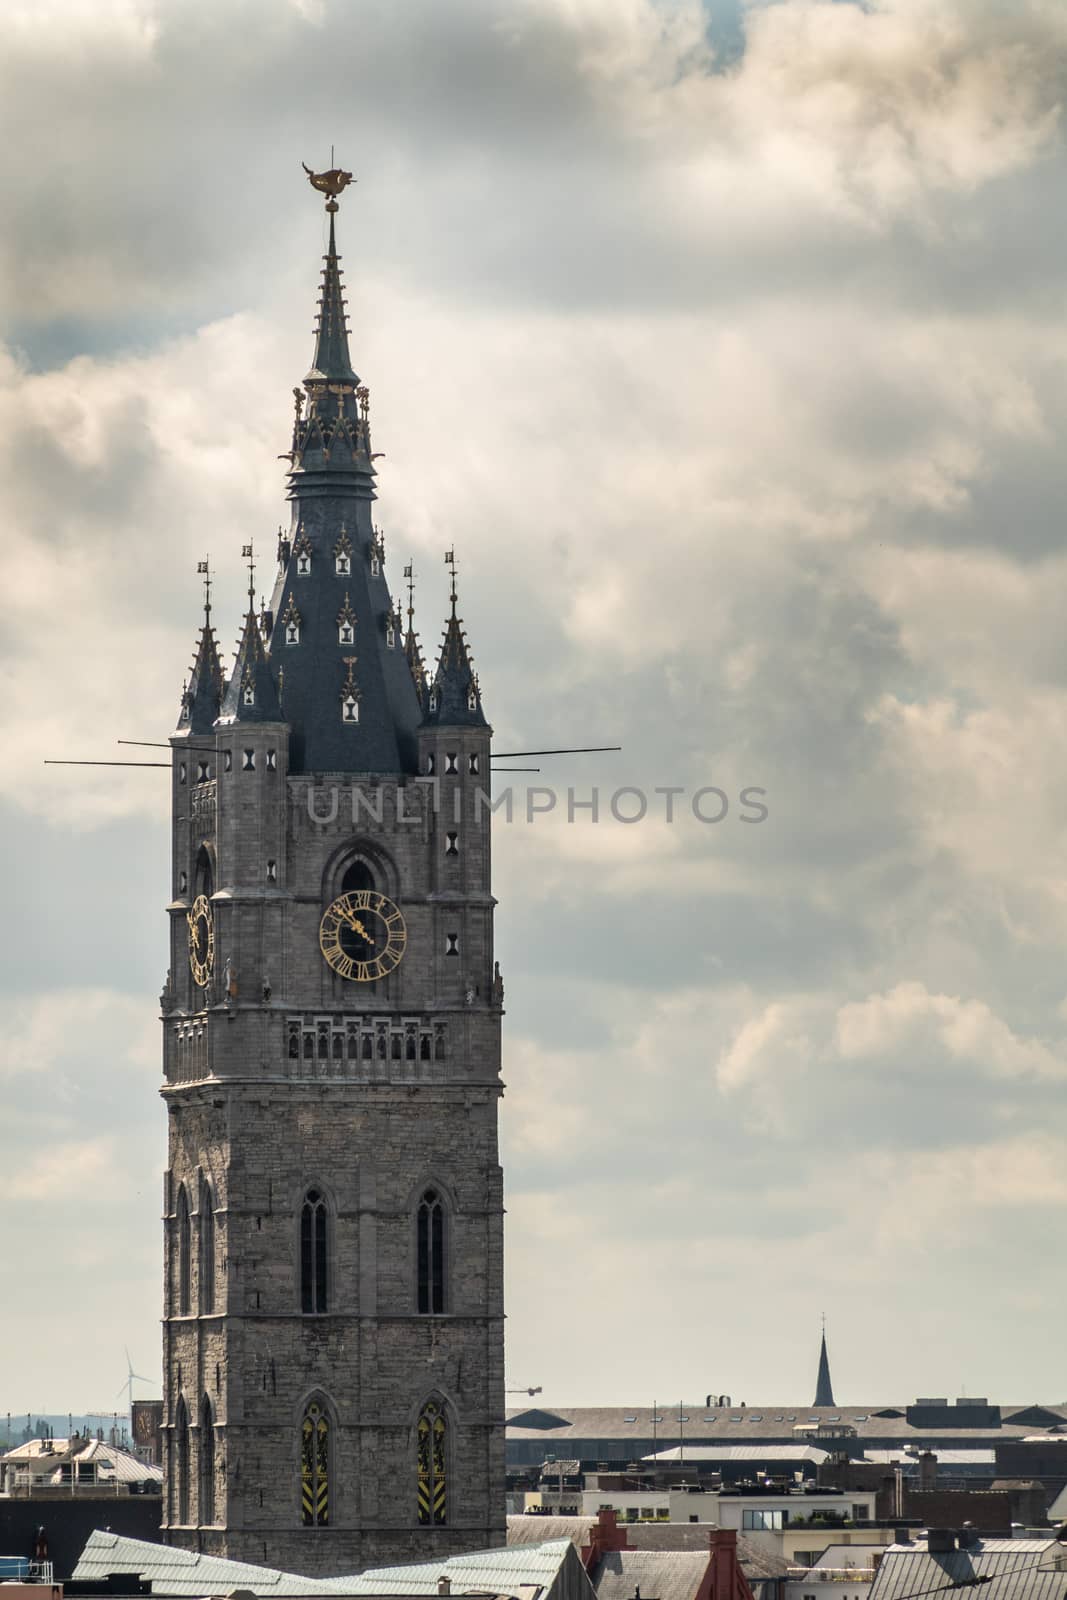 Gent, Flanders, Belgium -  June 21, 2019: Shot from castle tower, view over city roofs shows closeup of Belfry Tower against heavy white cloudscape with few blue patches.